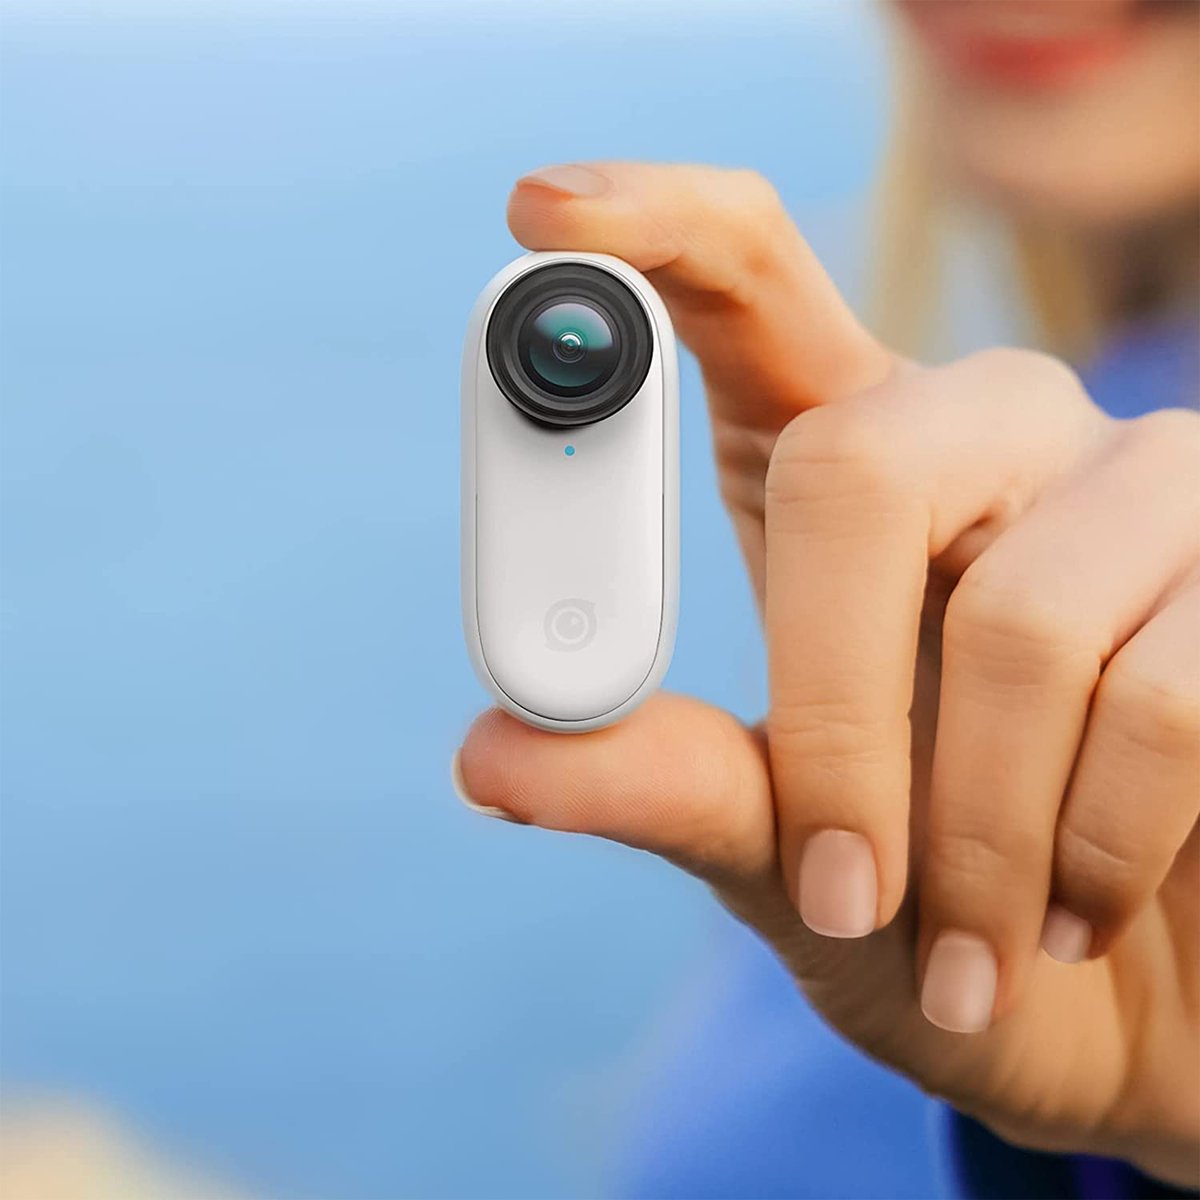 Insta360 GO 2 – Small Action Camera, Weighs 1 oz, Waterproof, Stabilization, POV Capture, 1/2.3" Sensor, with Charge Case and Wearable Camera Accessories for Travel, Sports, Vlog